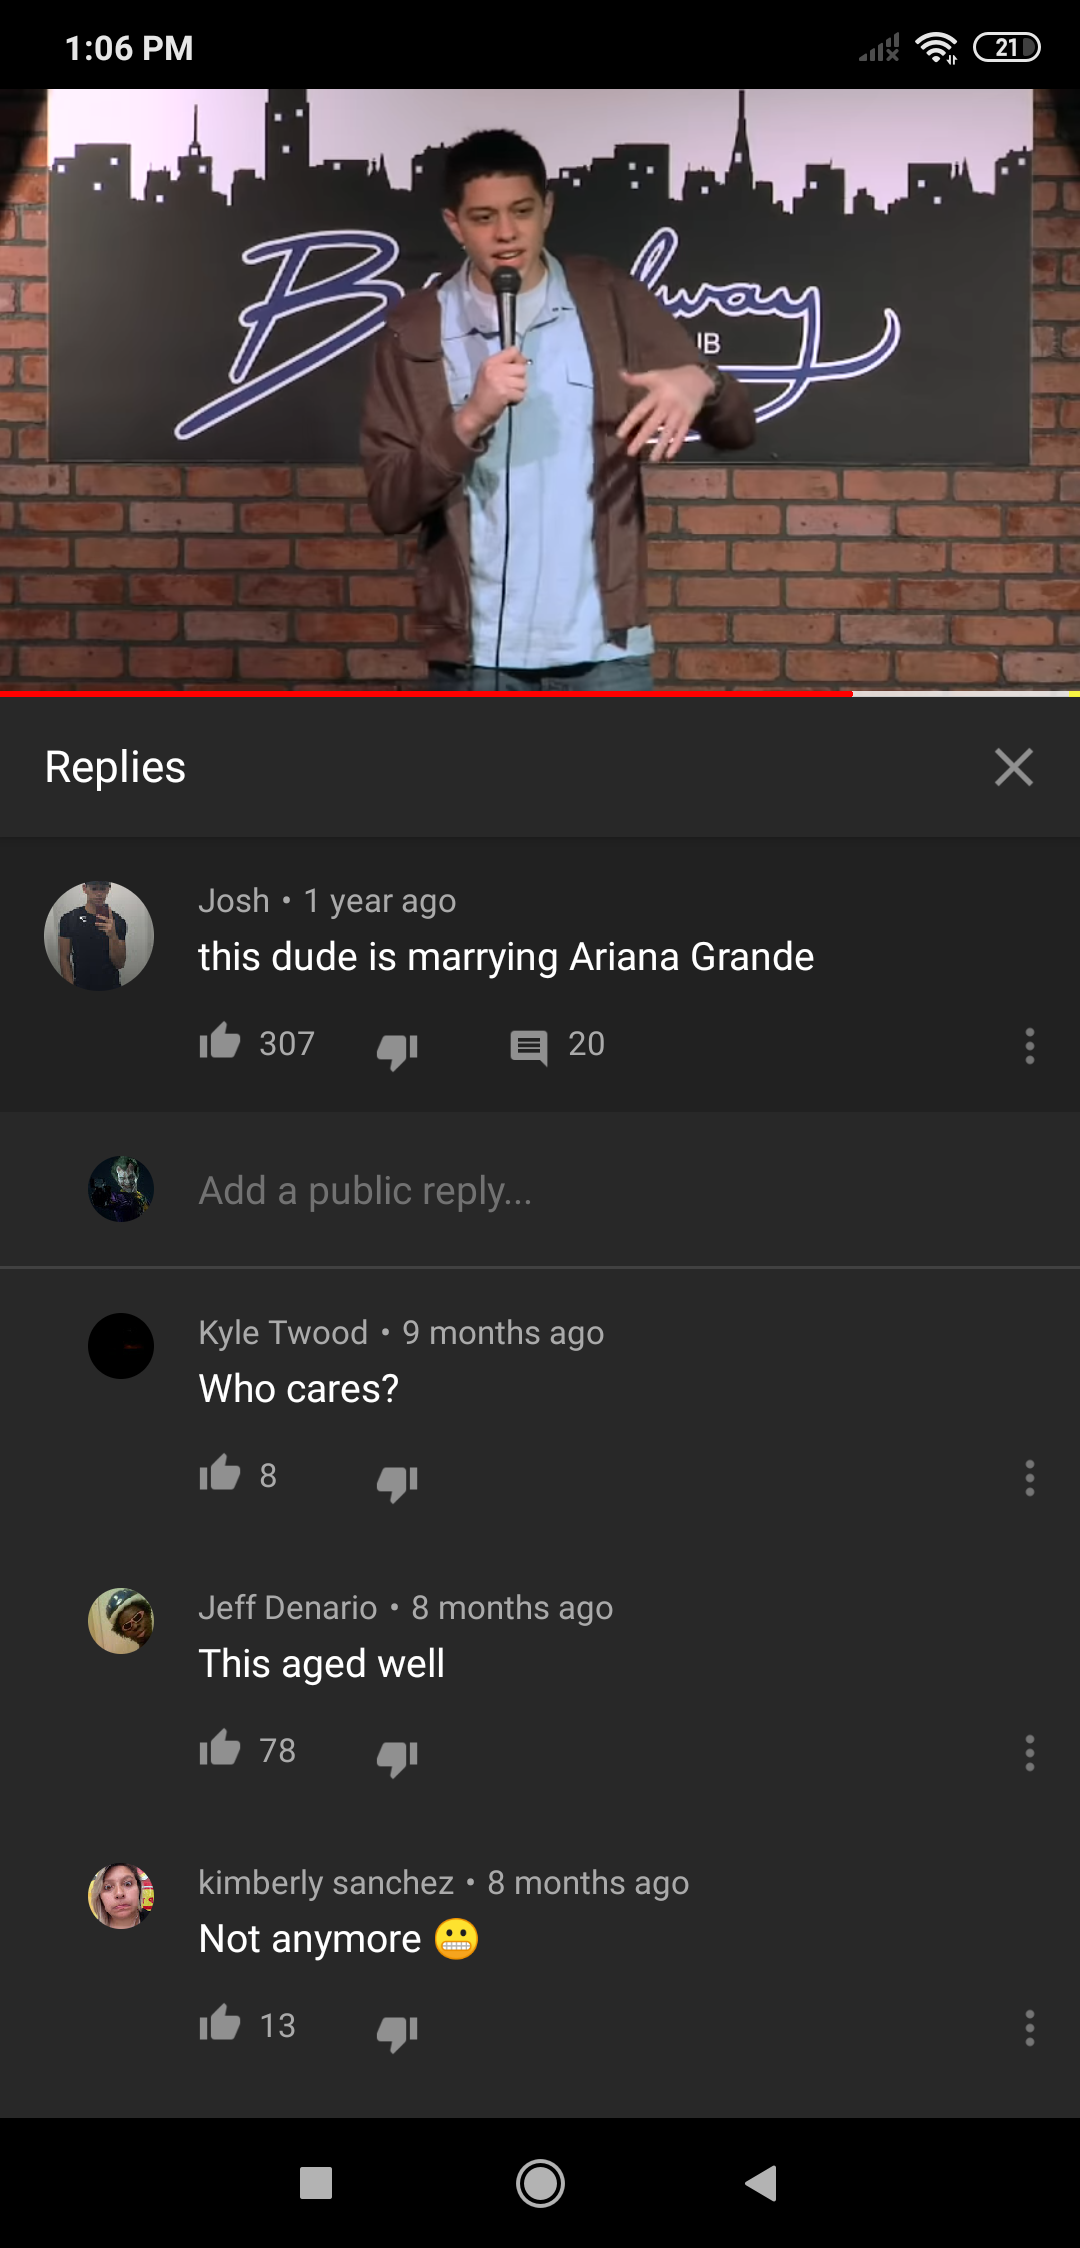 screenshot - Cd My Replies Josh 1 year ago this dude is marrying Ariana Grande 130720 Add a public Kyle Twood 9 months ago Who cares? Jeff Daniell months ago This aged well 78 L Ximberly sanchez 8 months ago Not anymore 13